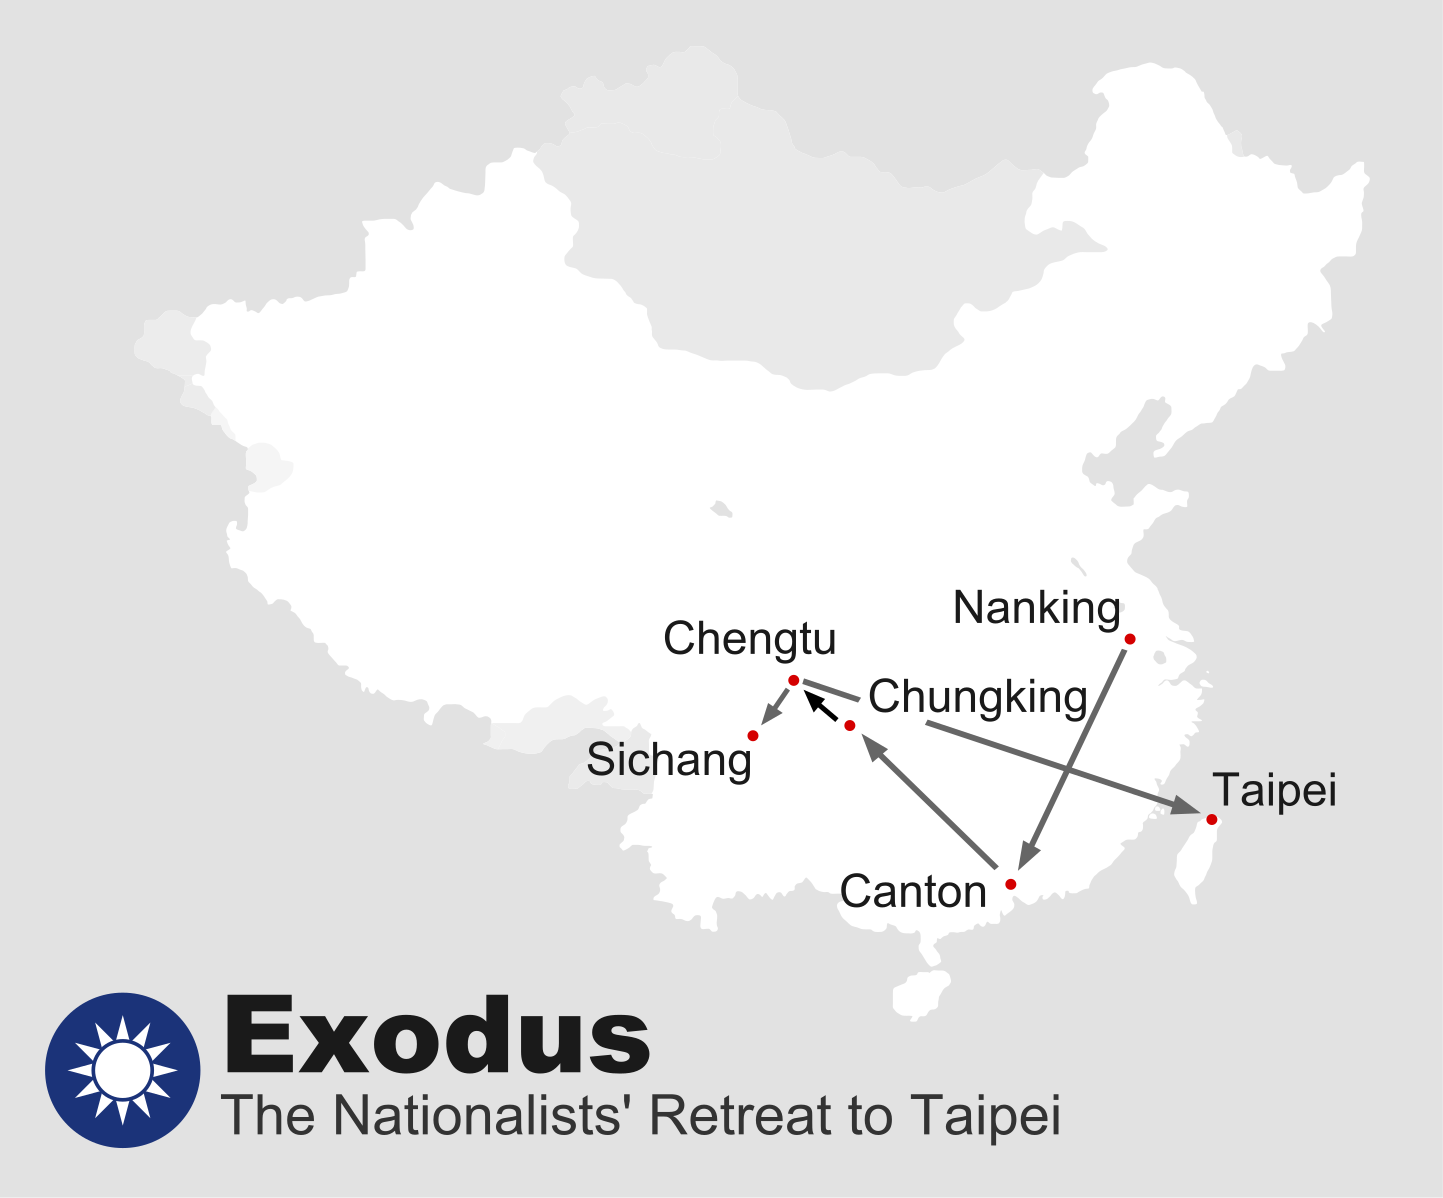 neo confucianism map